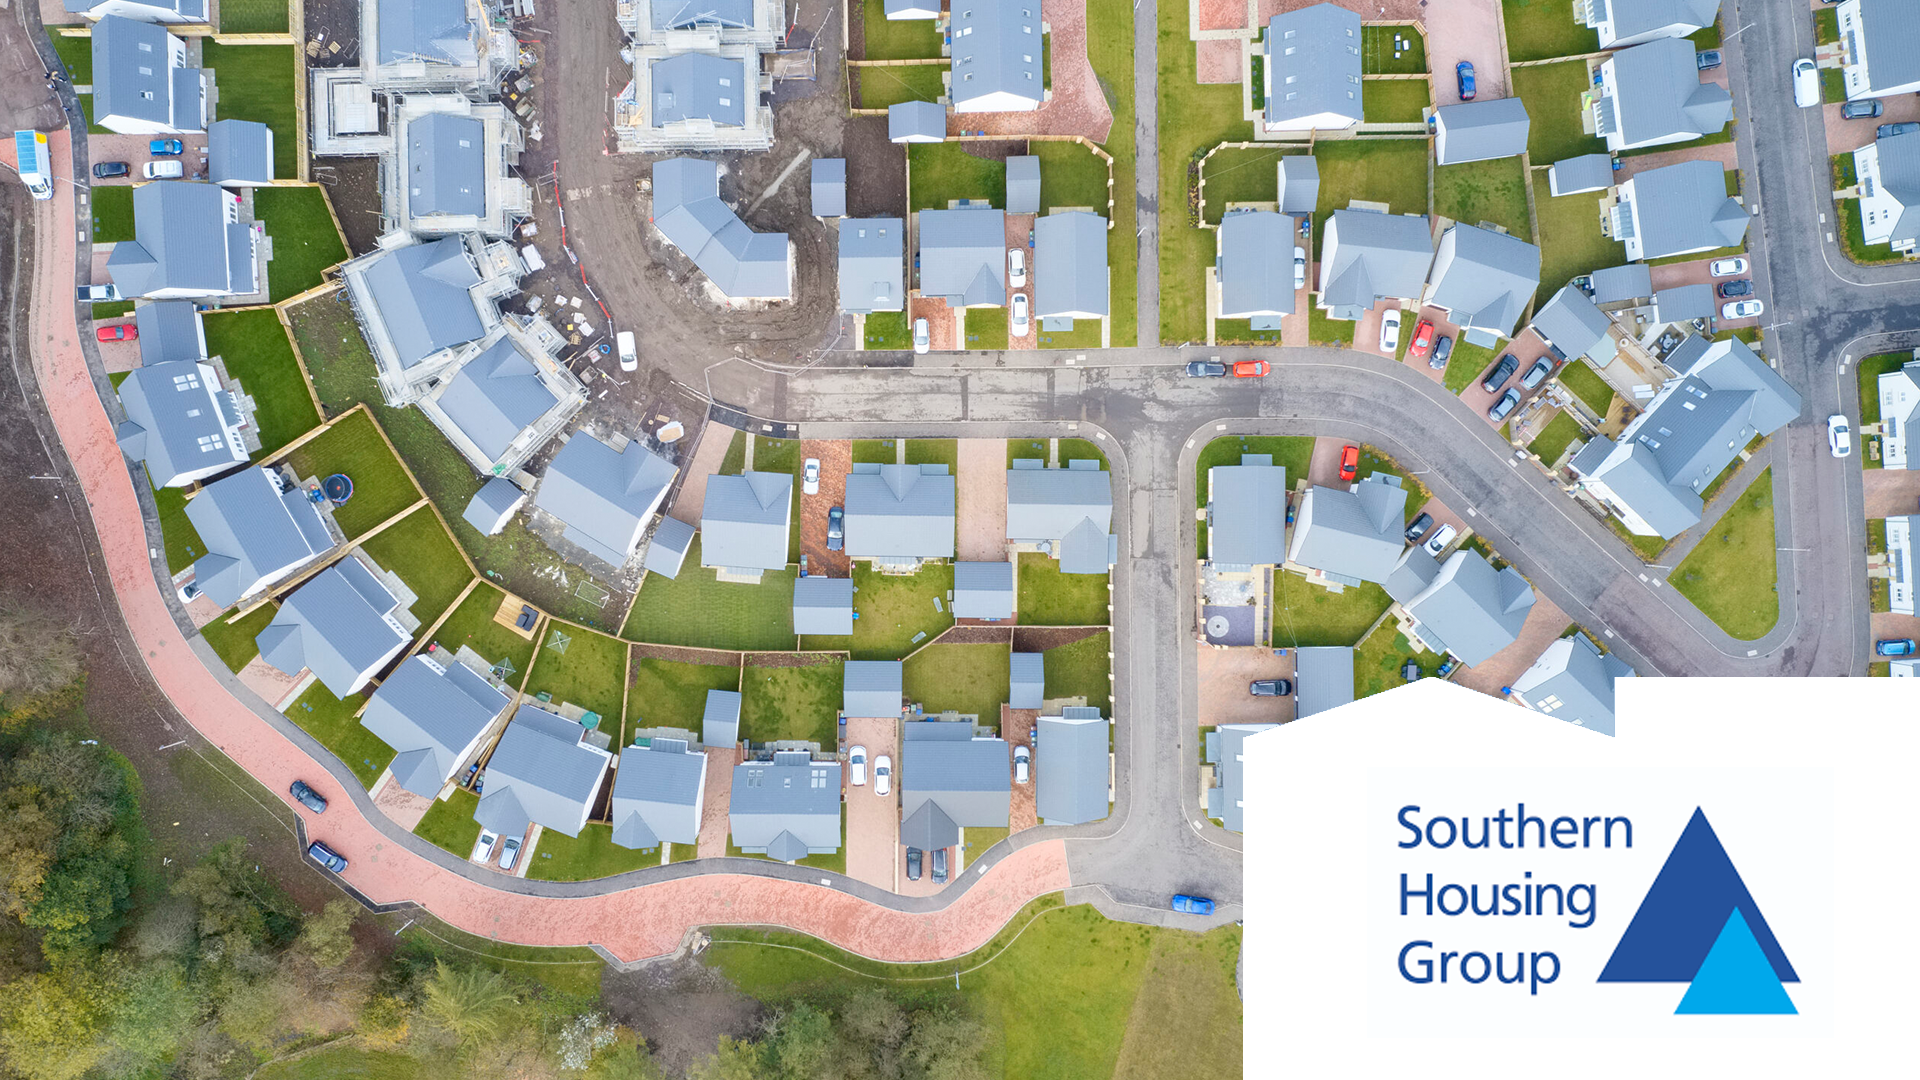 Southern Housing Group case study